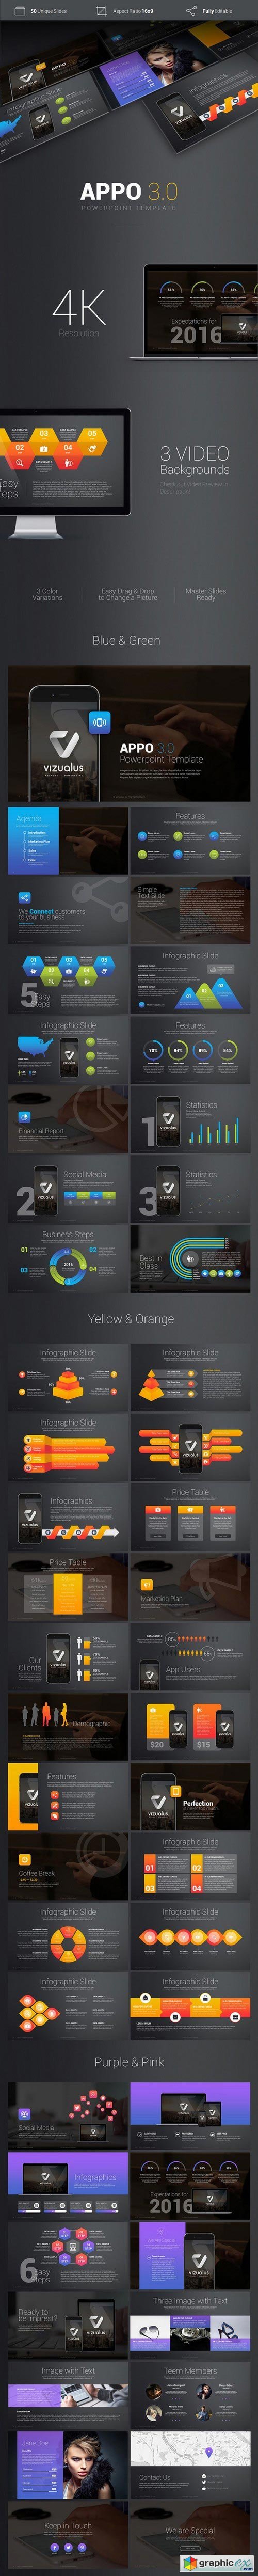 APPO 3.0 Powerpoint Template